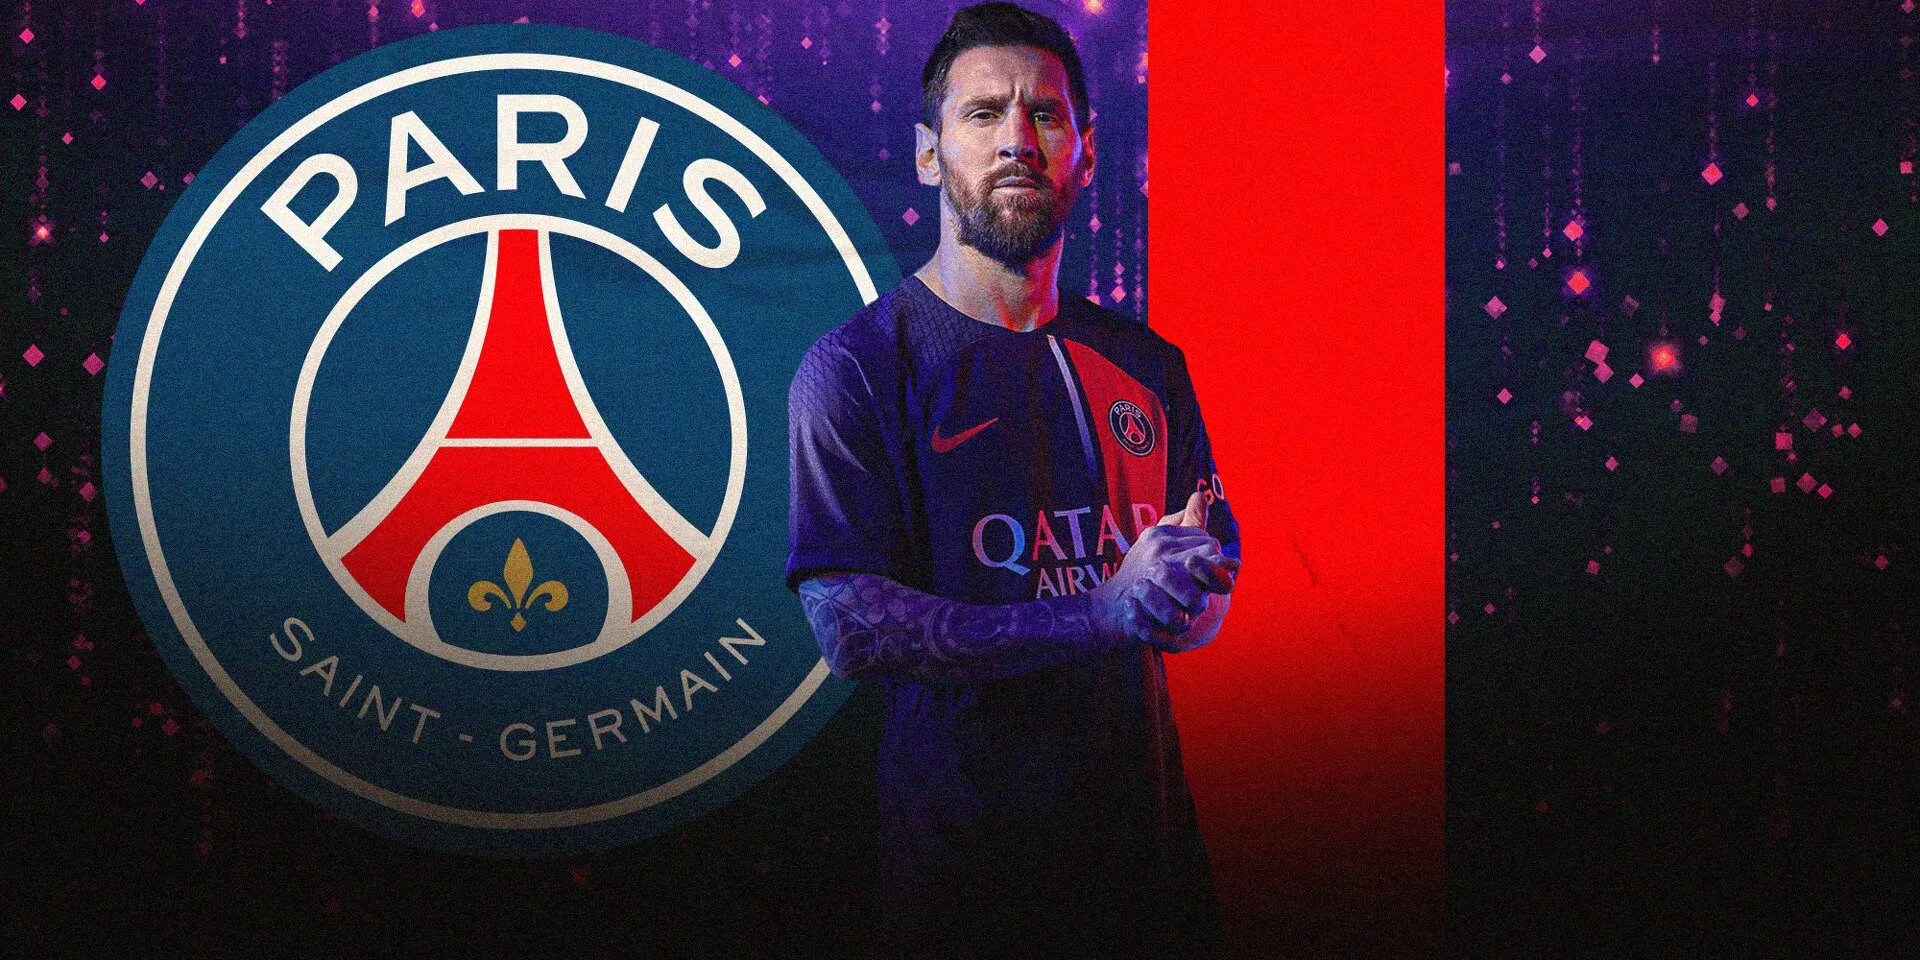 PSG unveil stunning new home kit for next season, featuring Lionel Messi